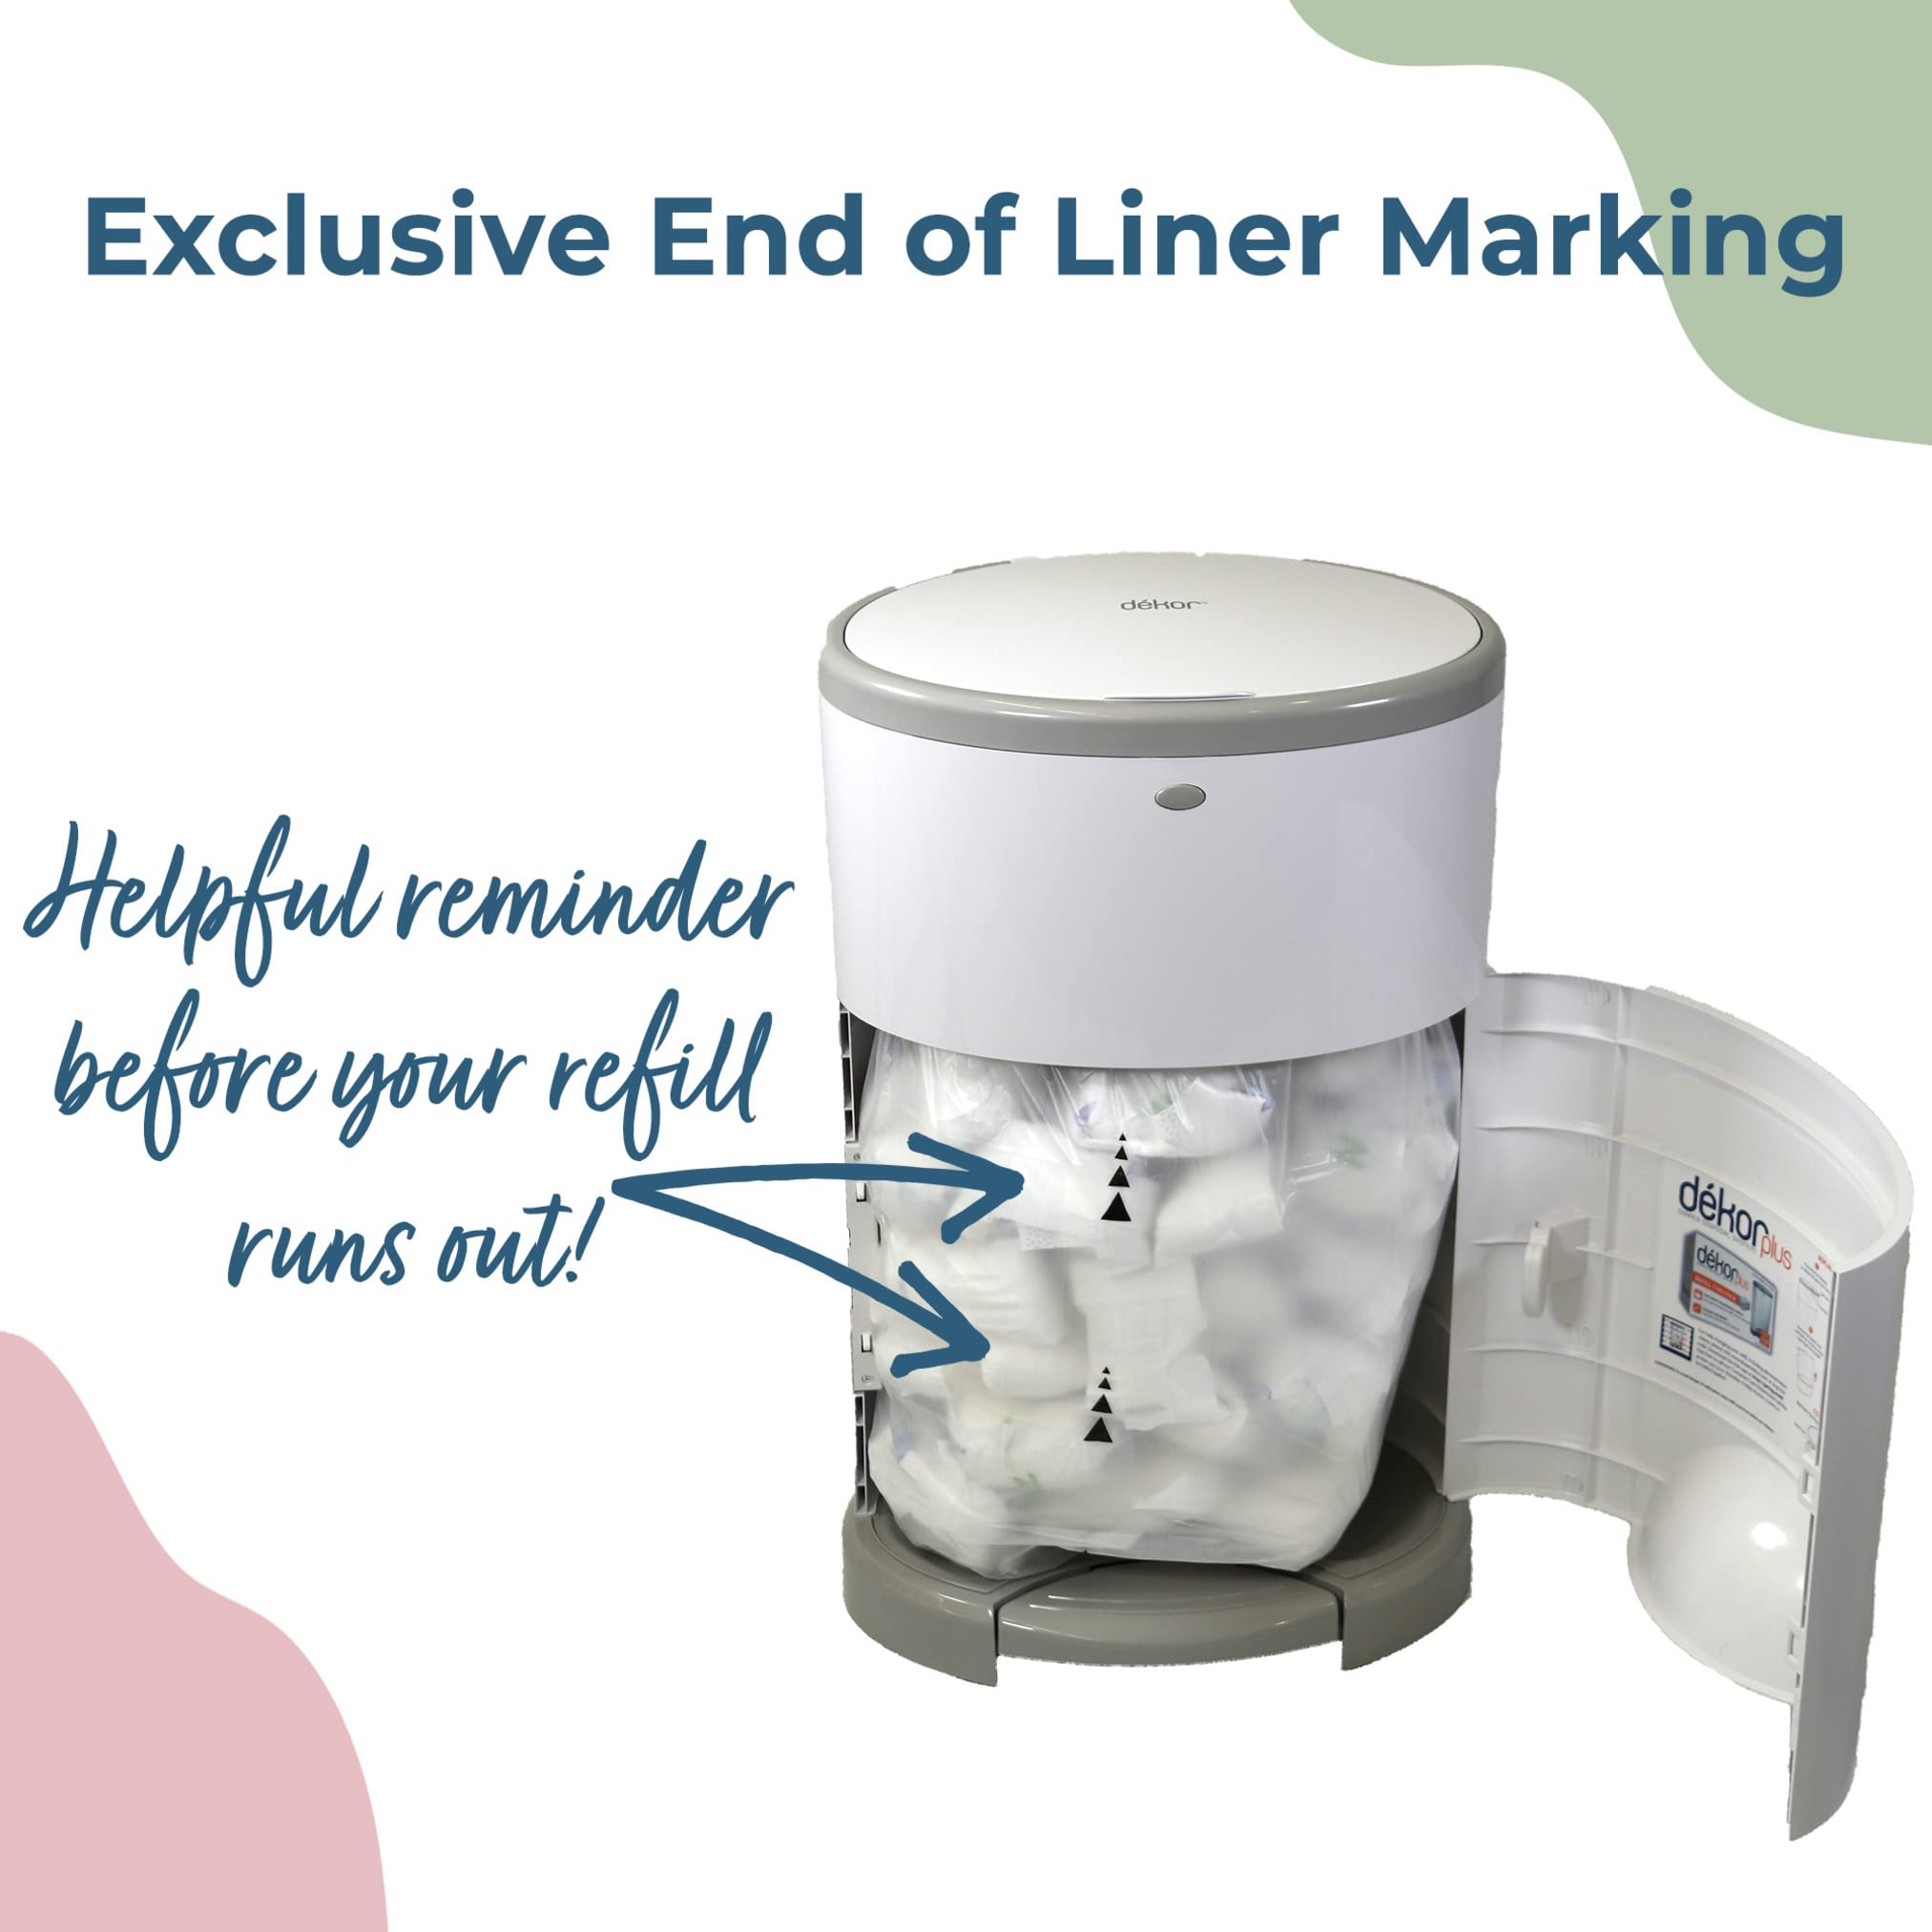 Dekor Classic Diaper Pail Refills|2 Count|Most Economical Refill System|Quick & Easy to Replace|No Preset Bag Size – Use Only What You Need|Exclusive End-of-Liner Marking|Baby Powder Scent